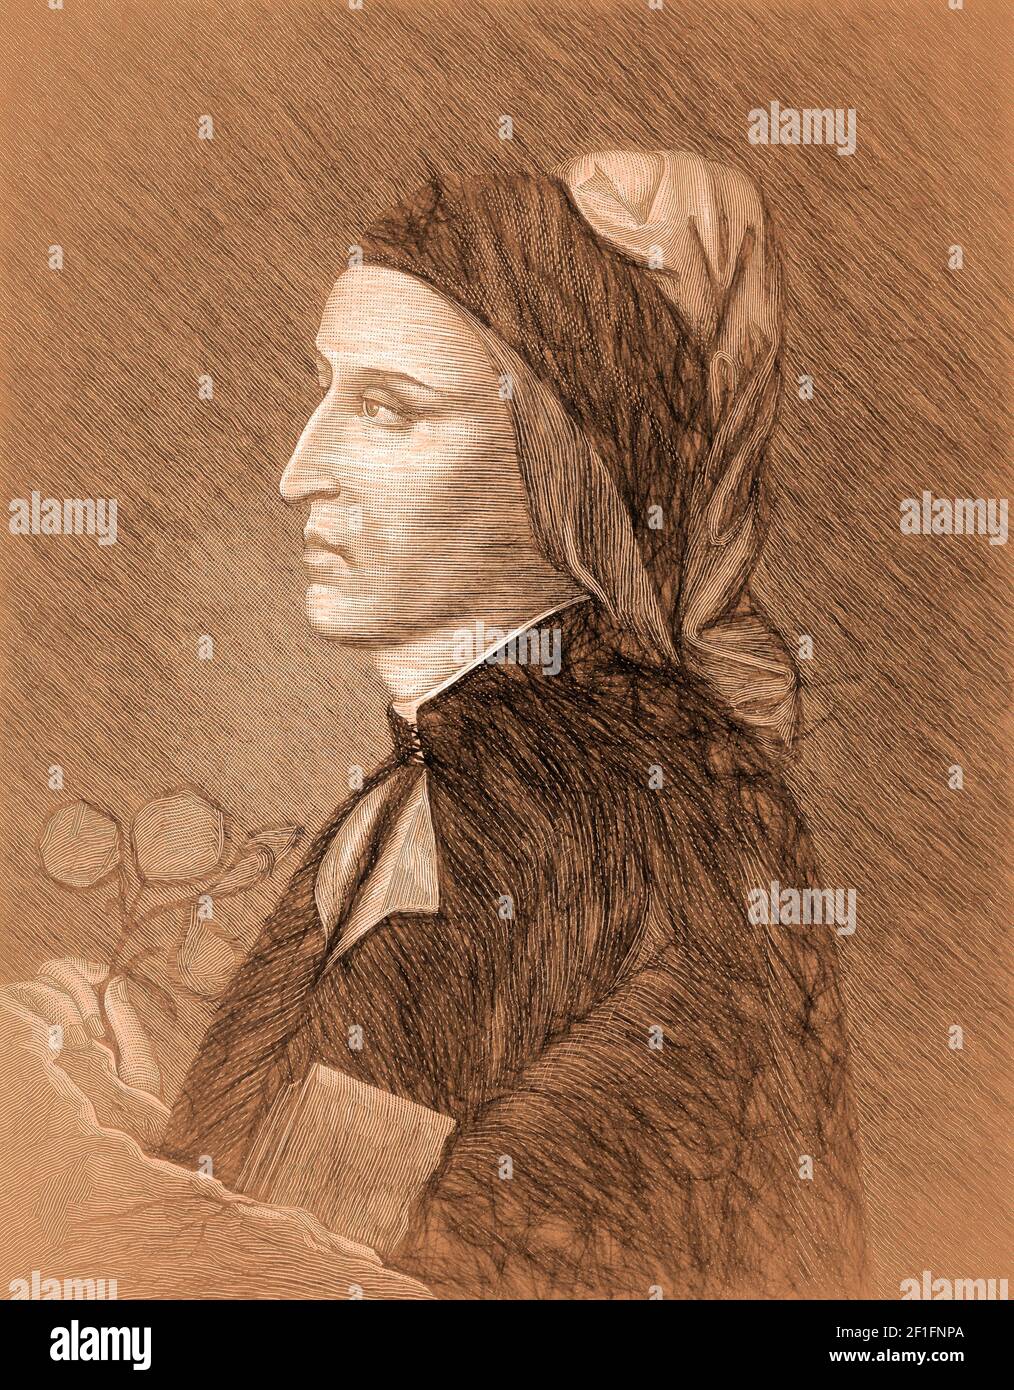 Dante Alighieri Italian poet portrait on a dark red background as  recollection of his Divine Comedy Inferno.Content made with generative AI  not based on real person. ilustração do Stock